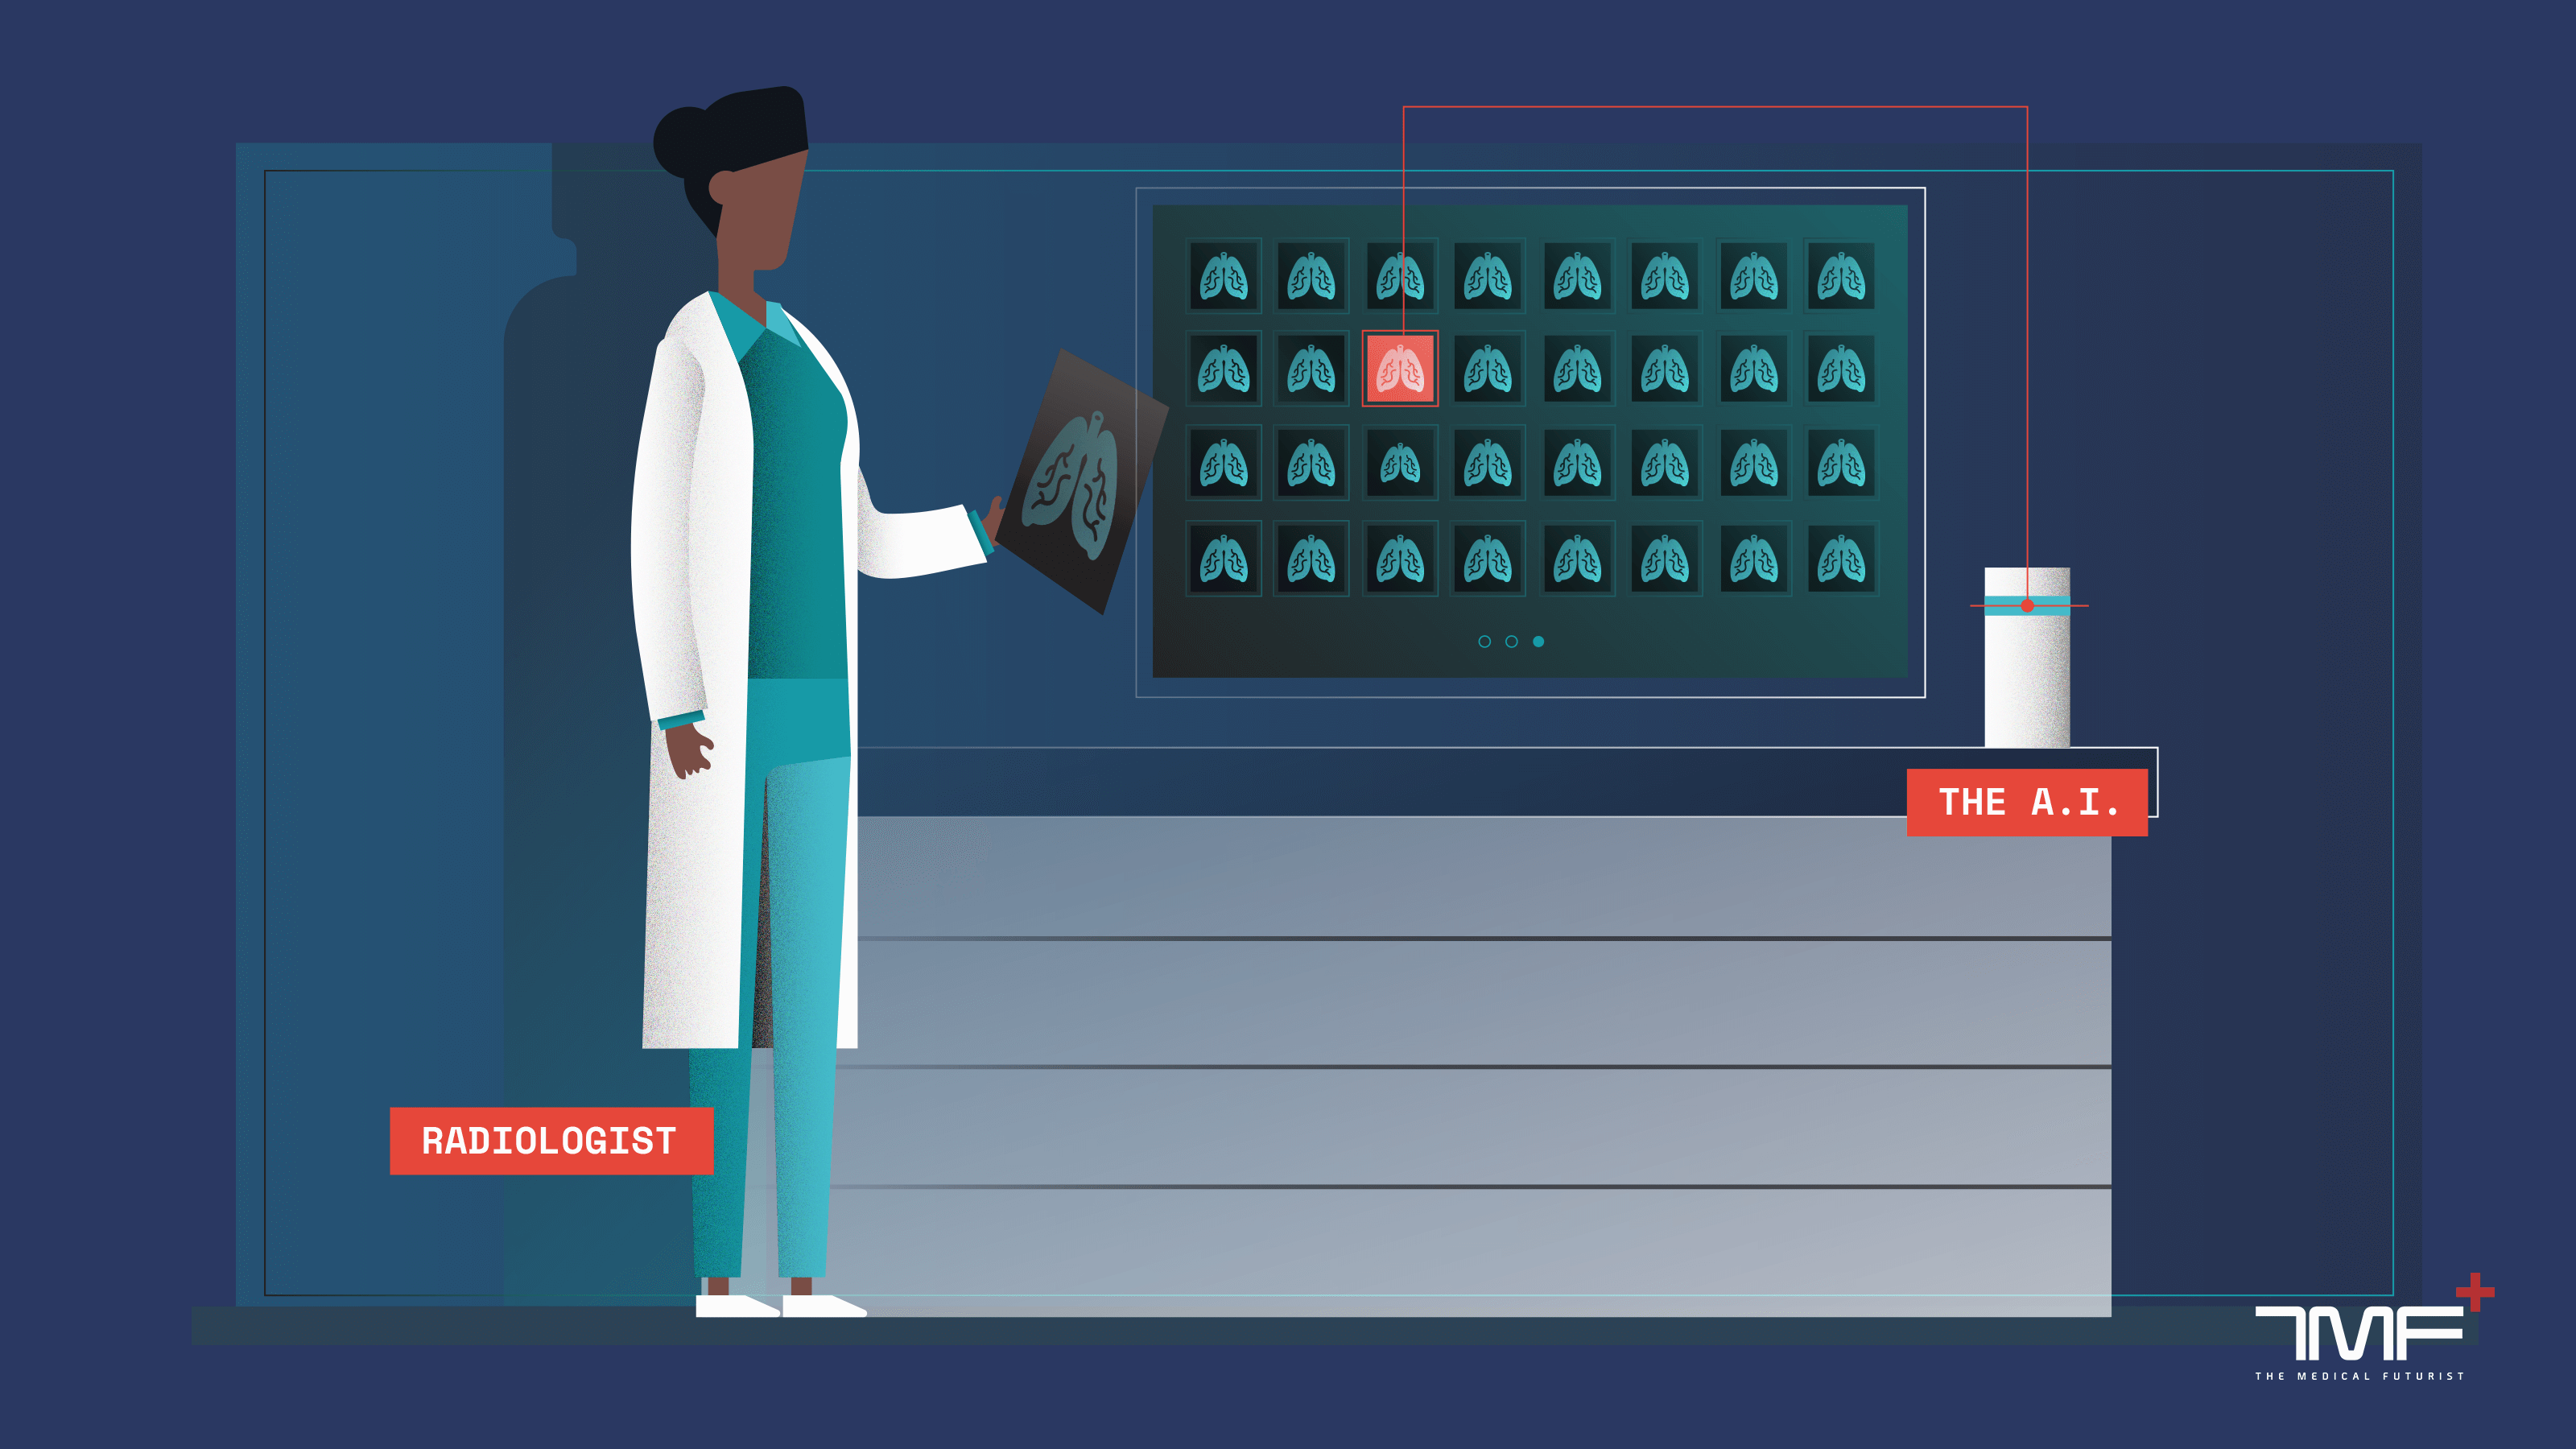 AI-Driven Doctor Apps : doctor app